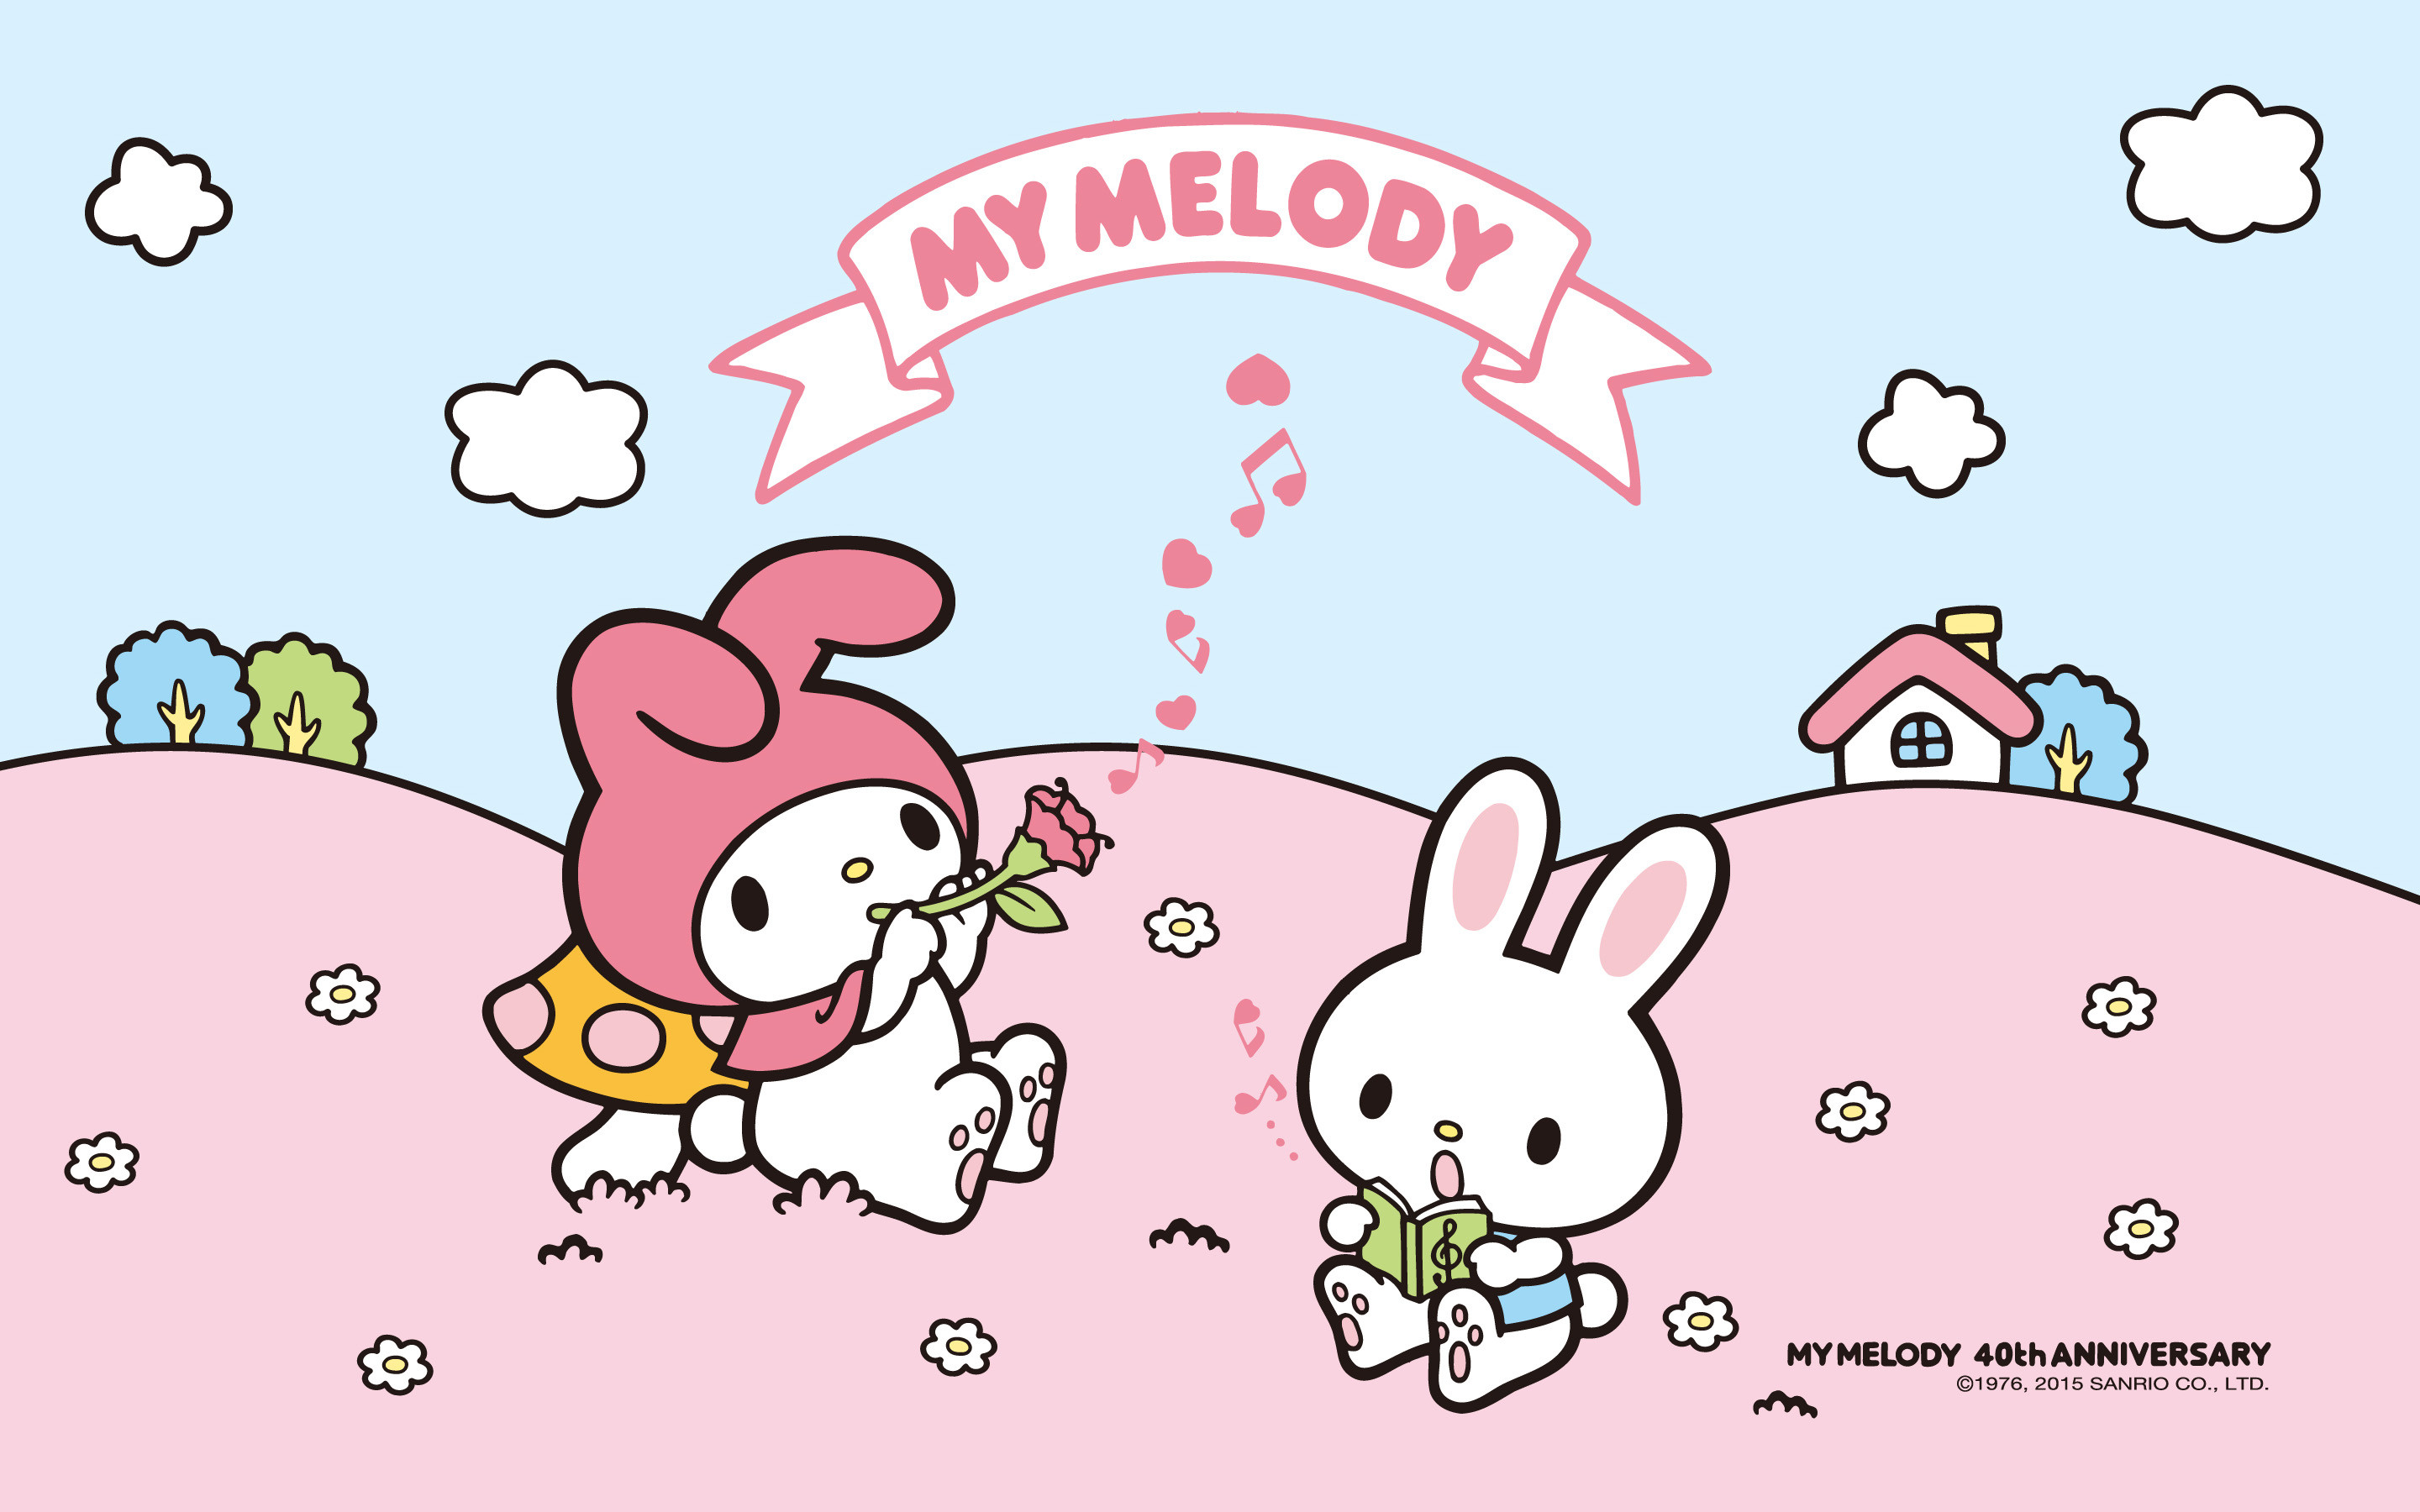 2880x1800 ... Background - A super cute desktop background from Sanrio - My Melody  Pink & Blue Music Background! Click the image to view the full size  wallpaper :).